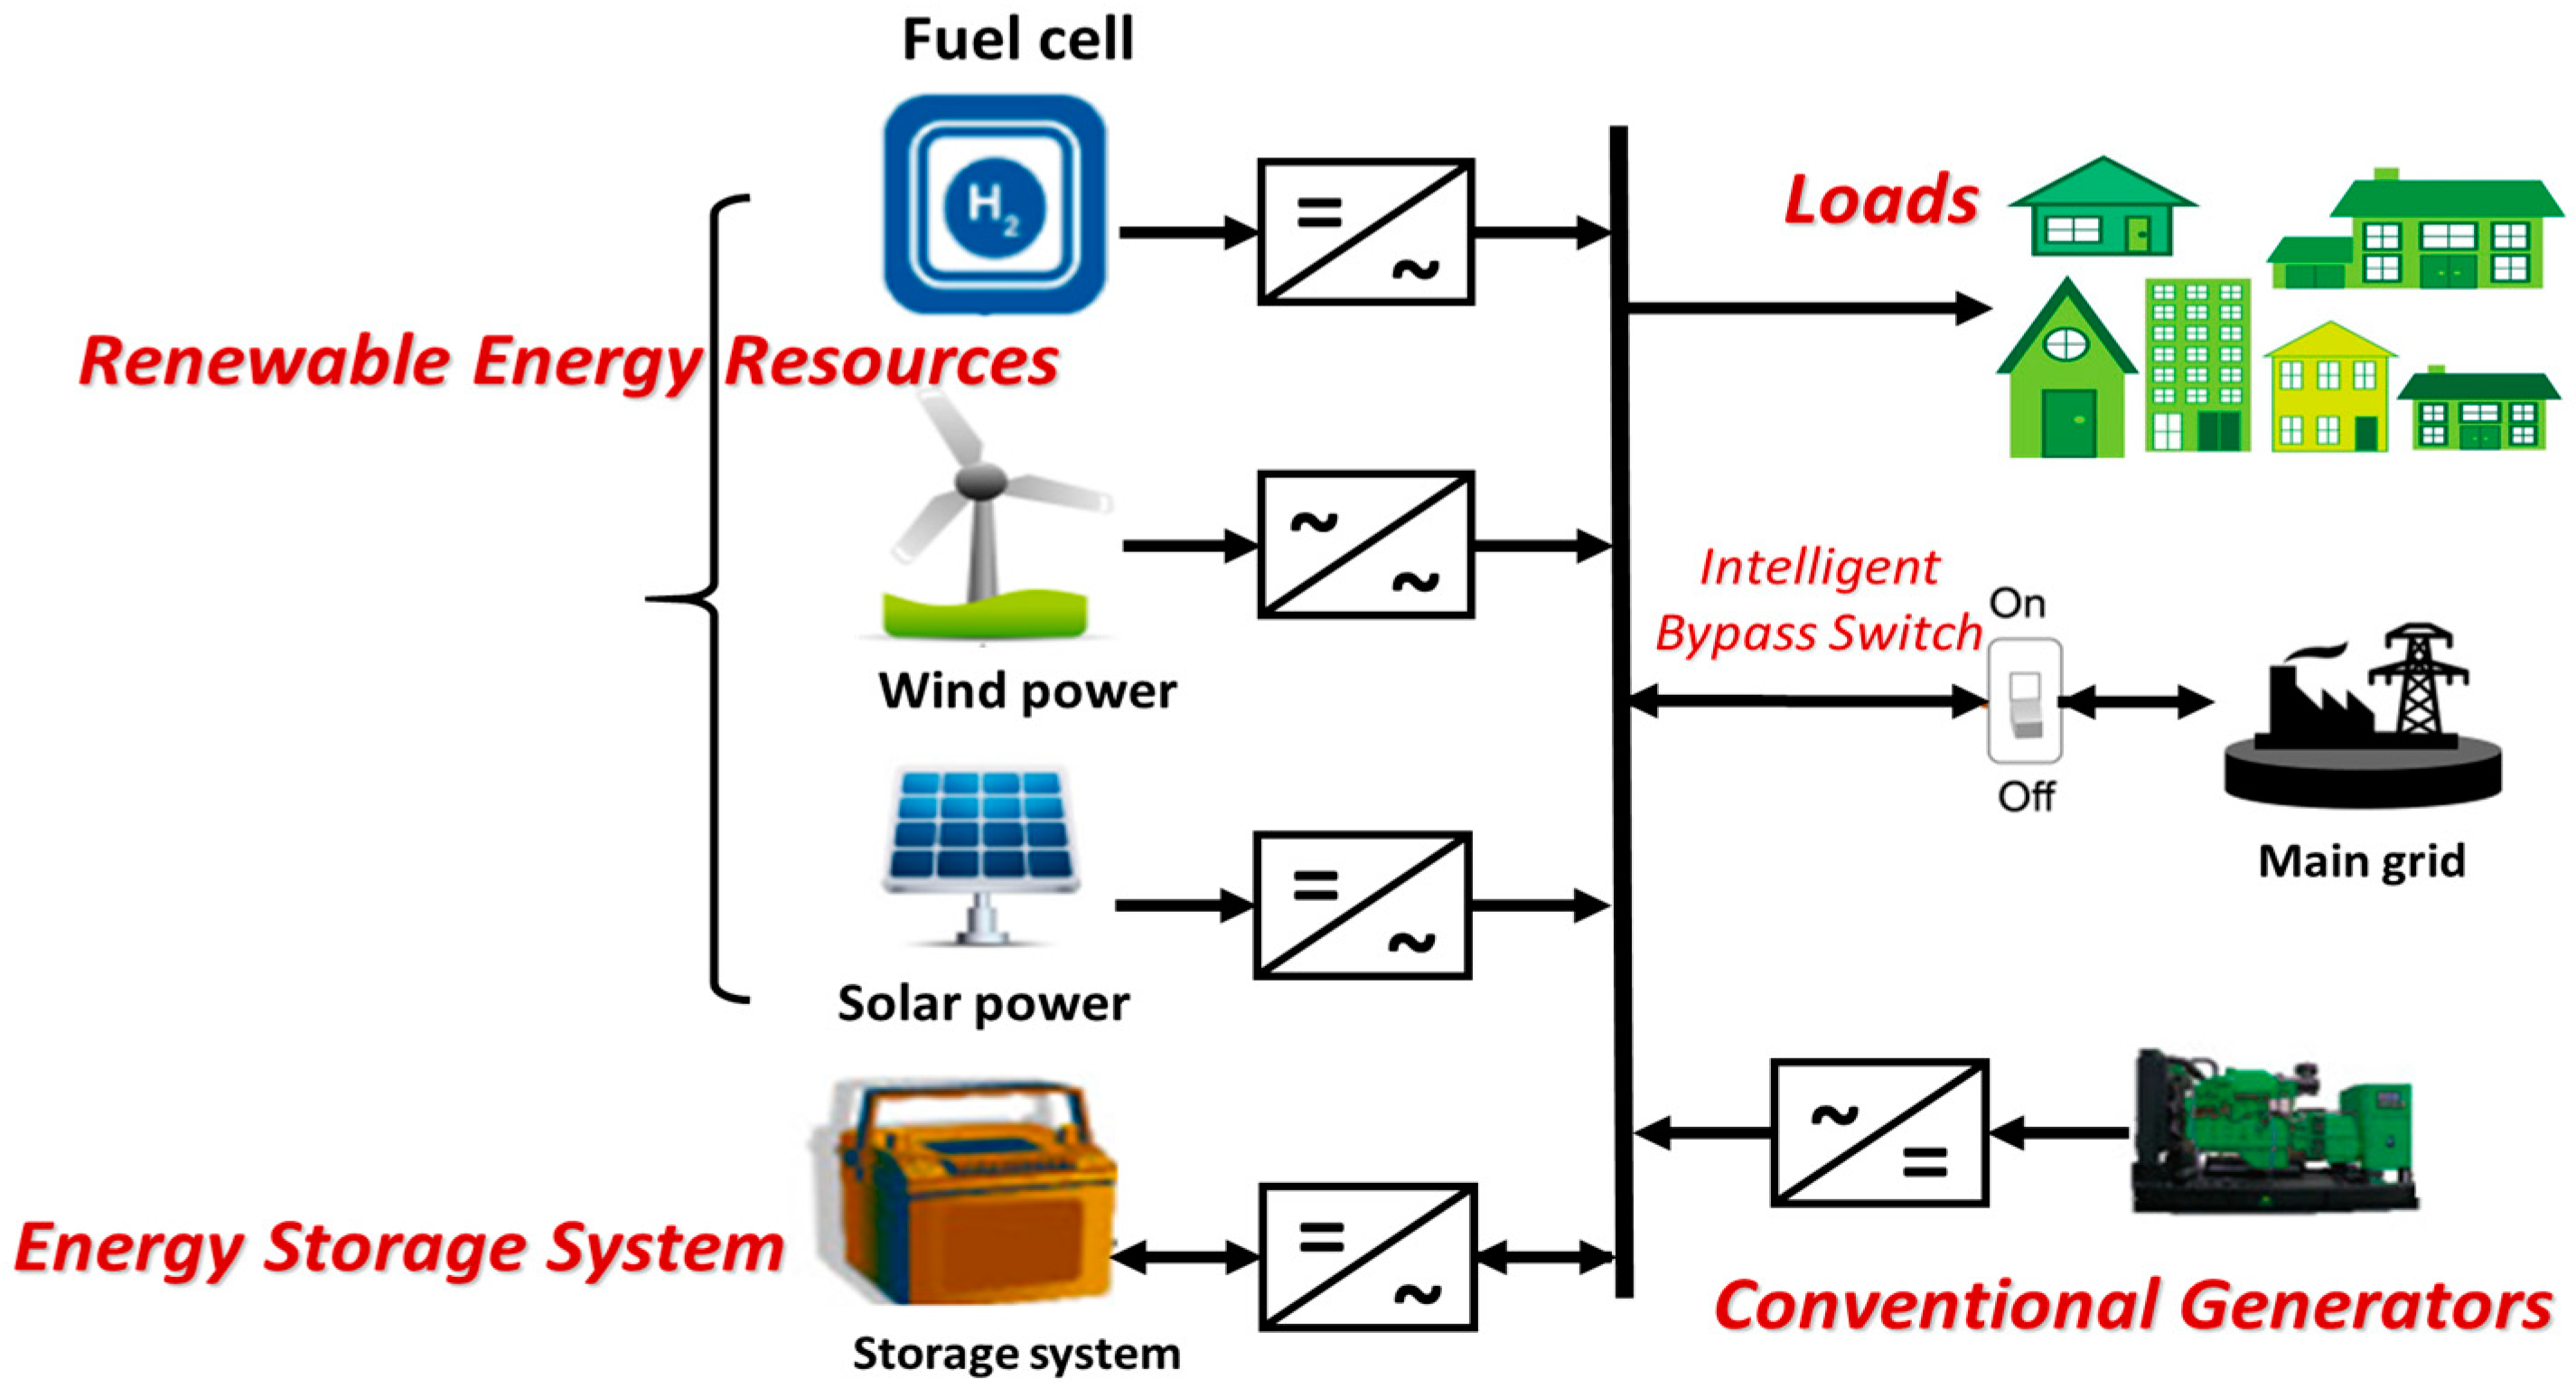 I. Introduction to Energy Storage in Remote Islands and Isolated Communities